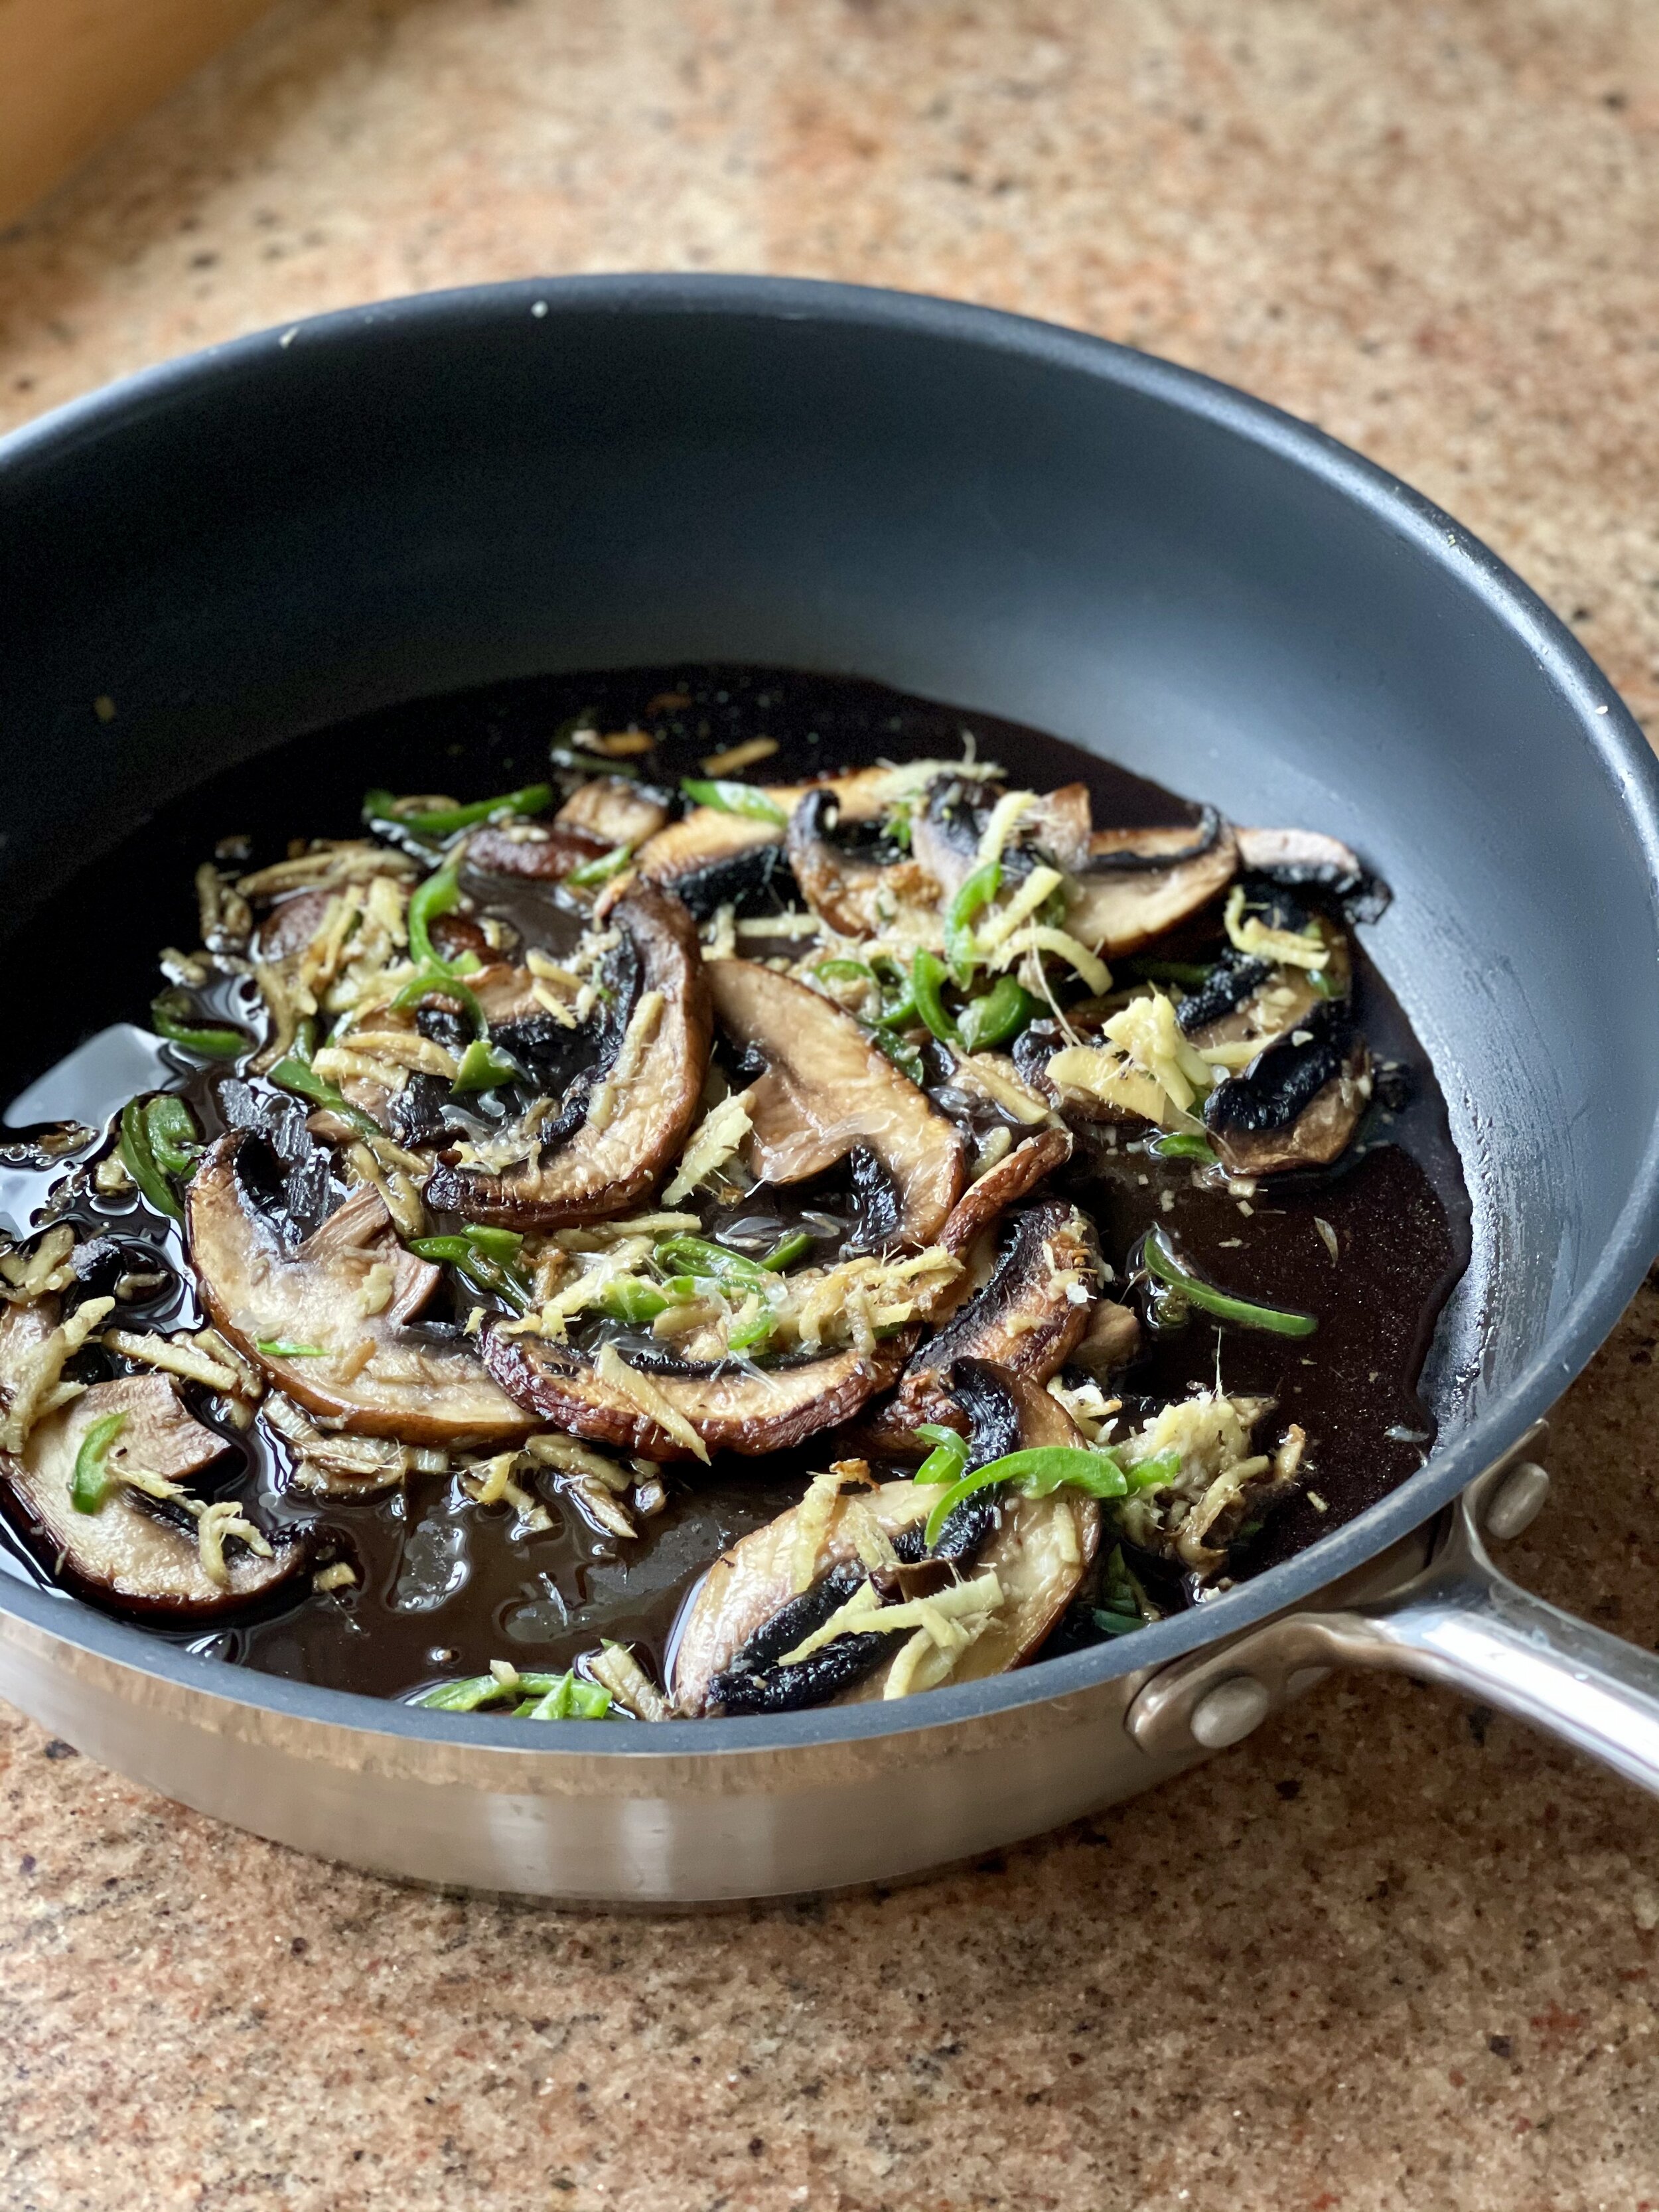 Mushroom and sesame oil sauce with ginger and garlic